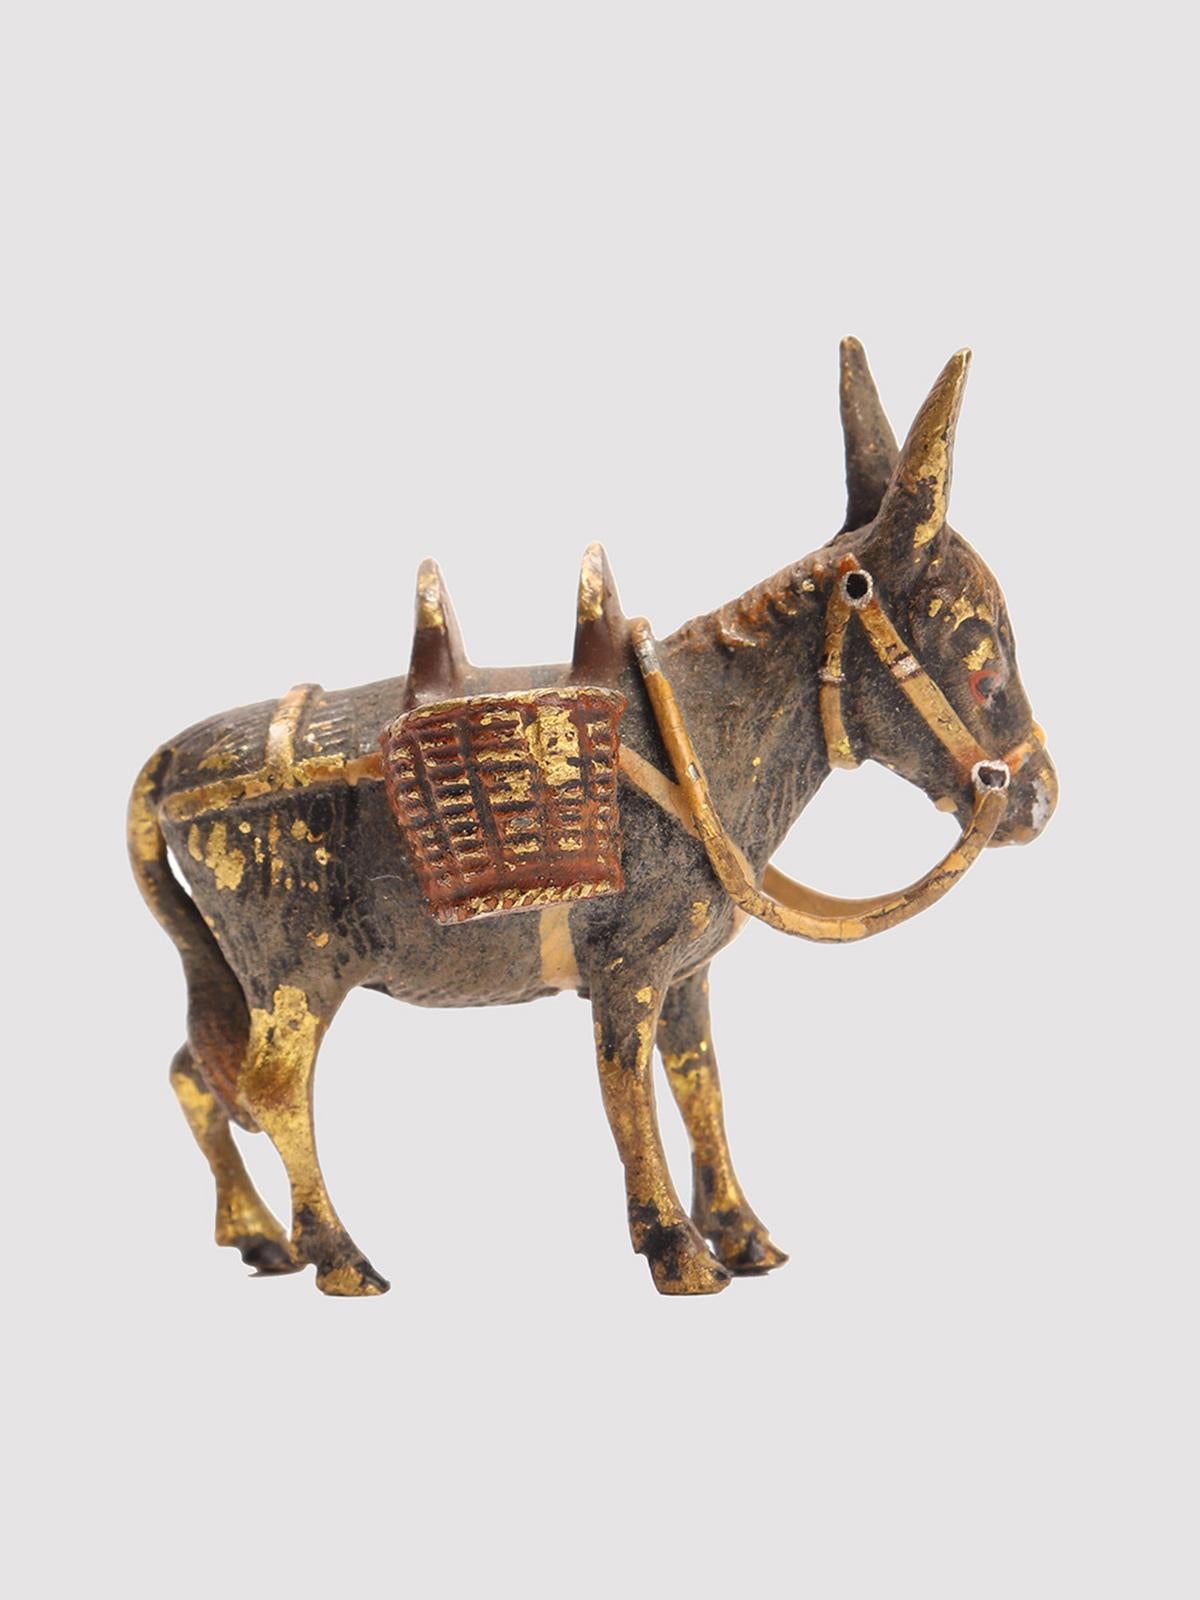 Painted wiener bronze depicting a mule, painted in different colors. Wien Austria, circa 1890.